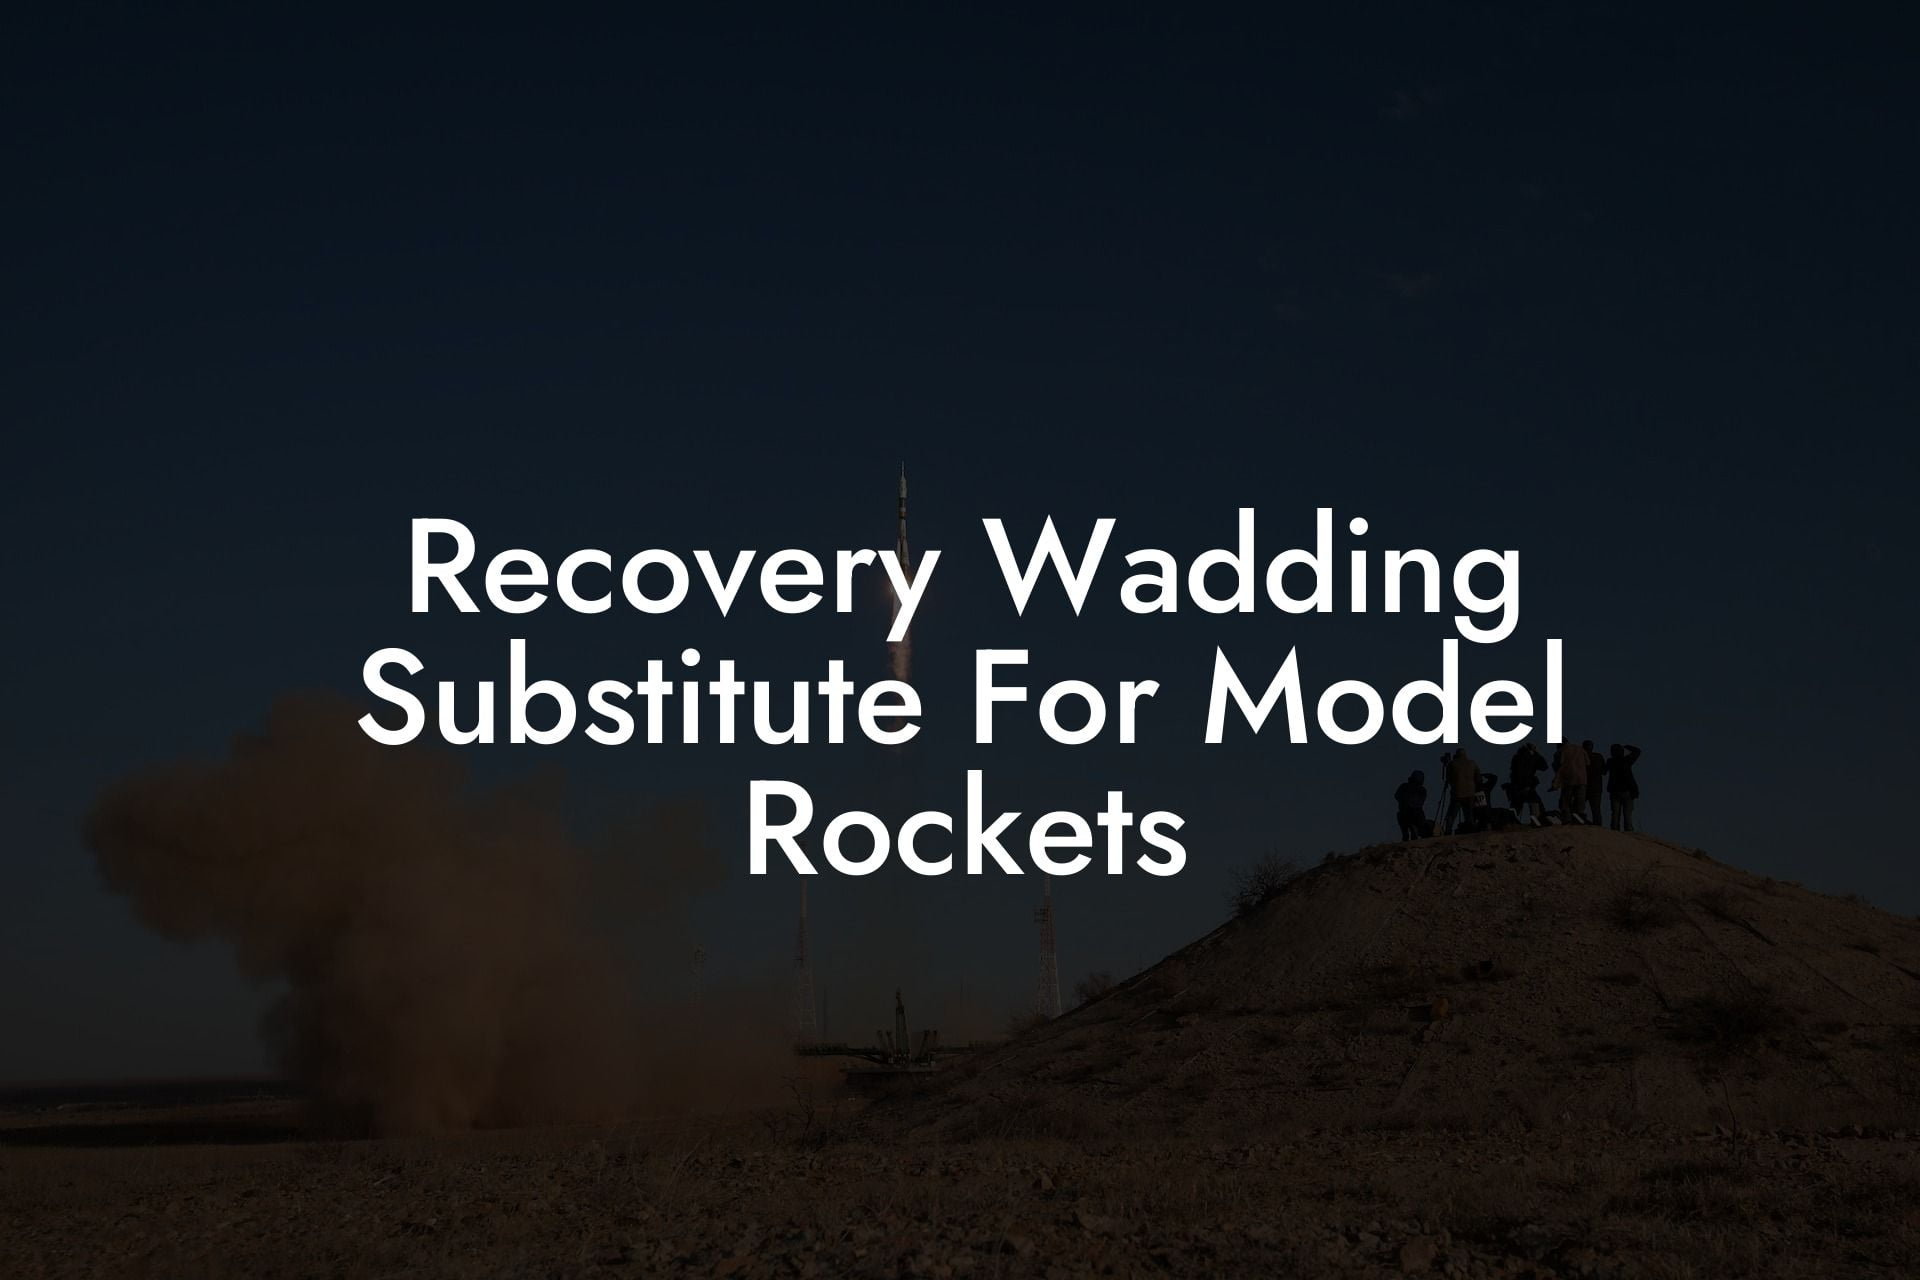 Recovery Wadding Substitute For Model Rockets